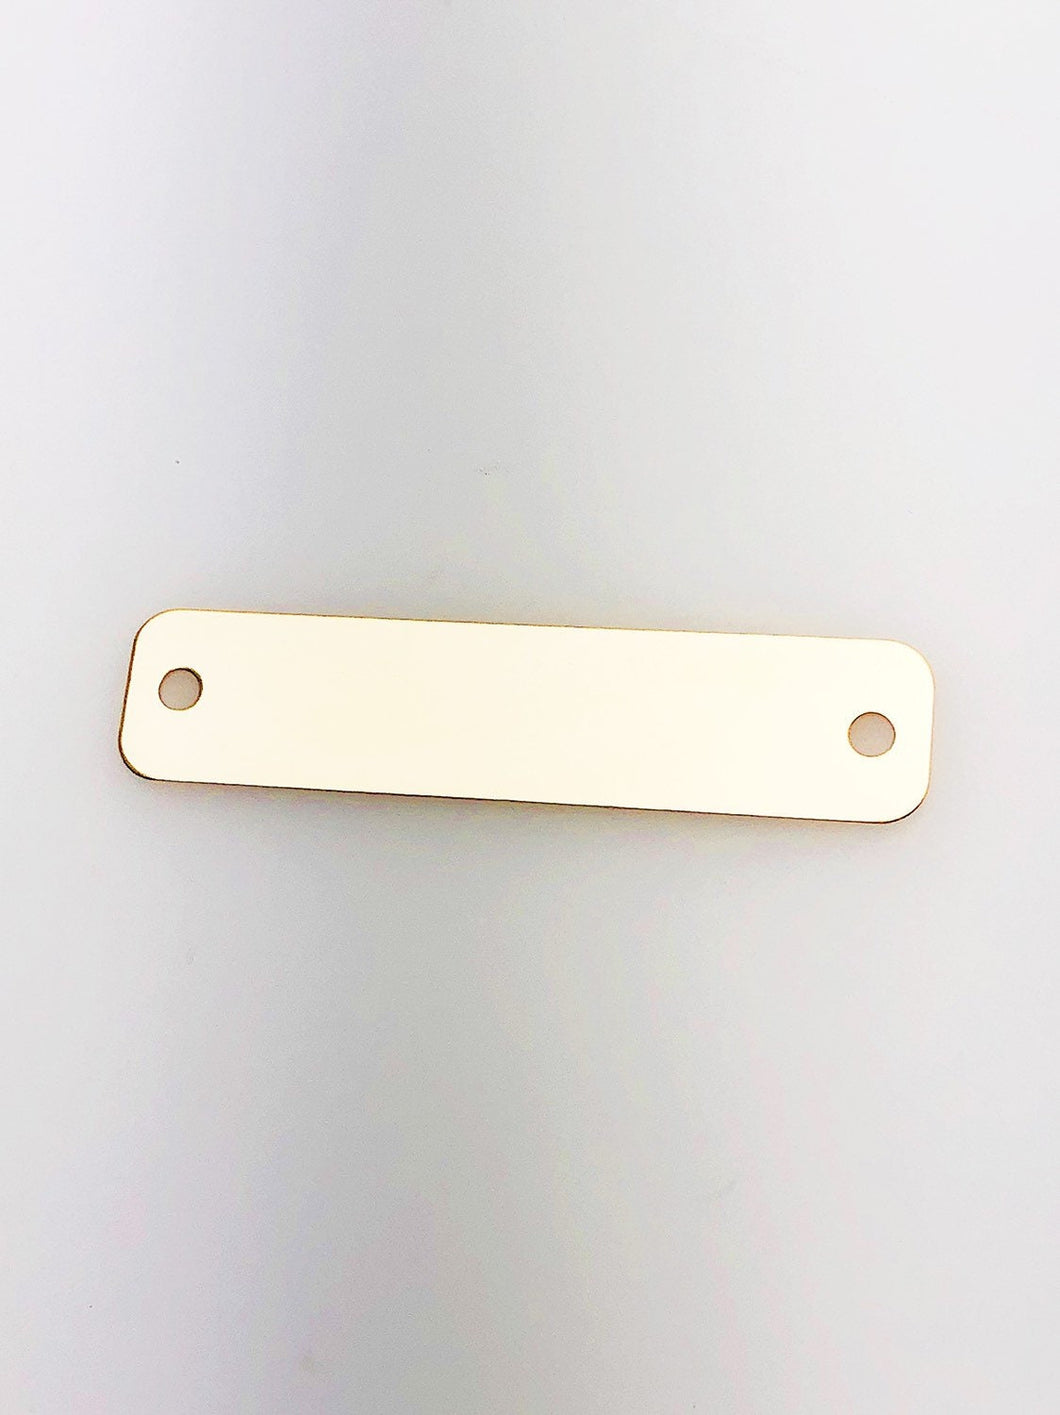 14K Gold Fill Bar Tag Charm w/ Two Holes, 44.0x10.1mm, Made in USA - 2513